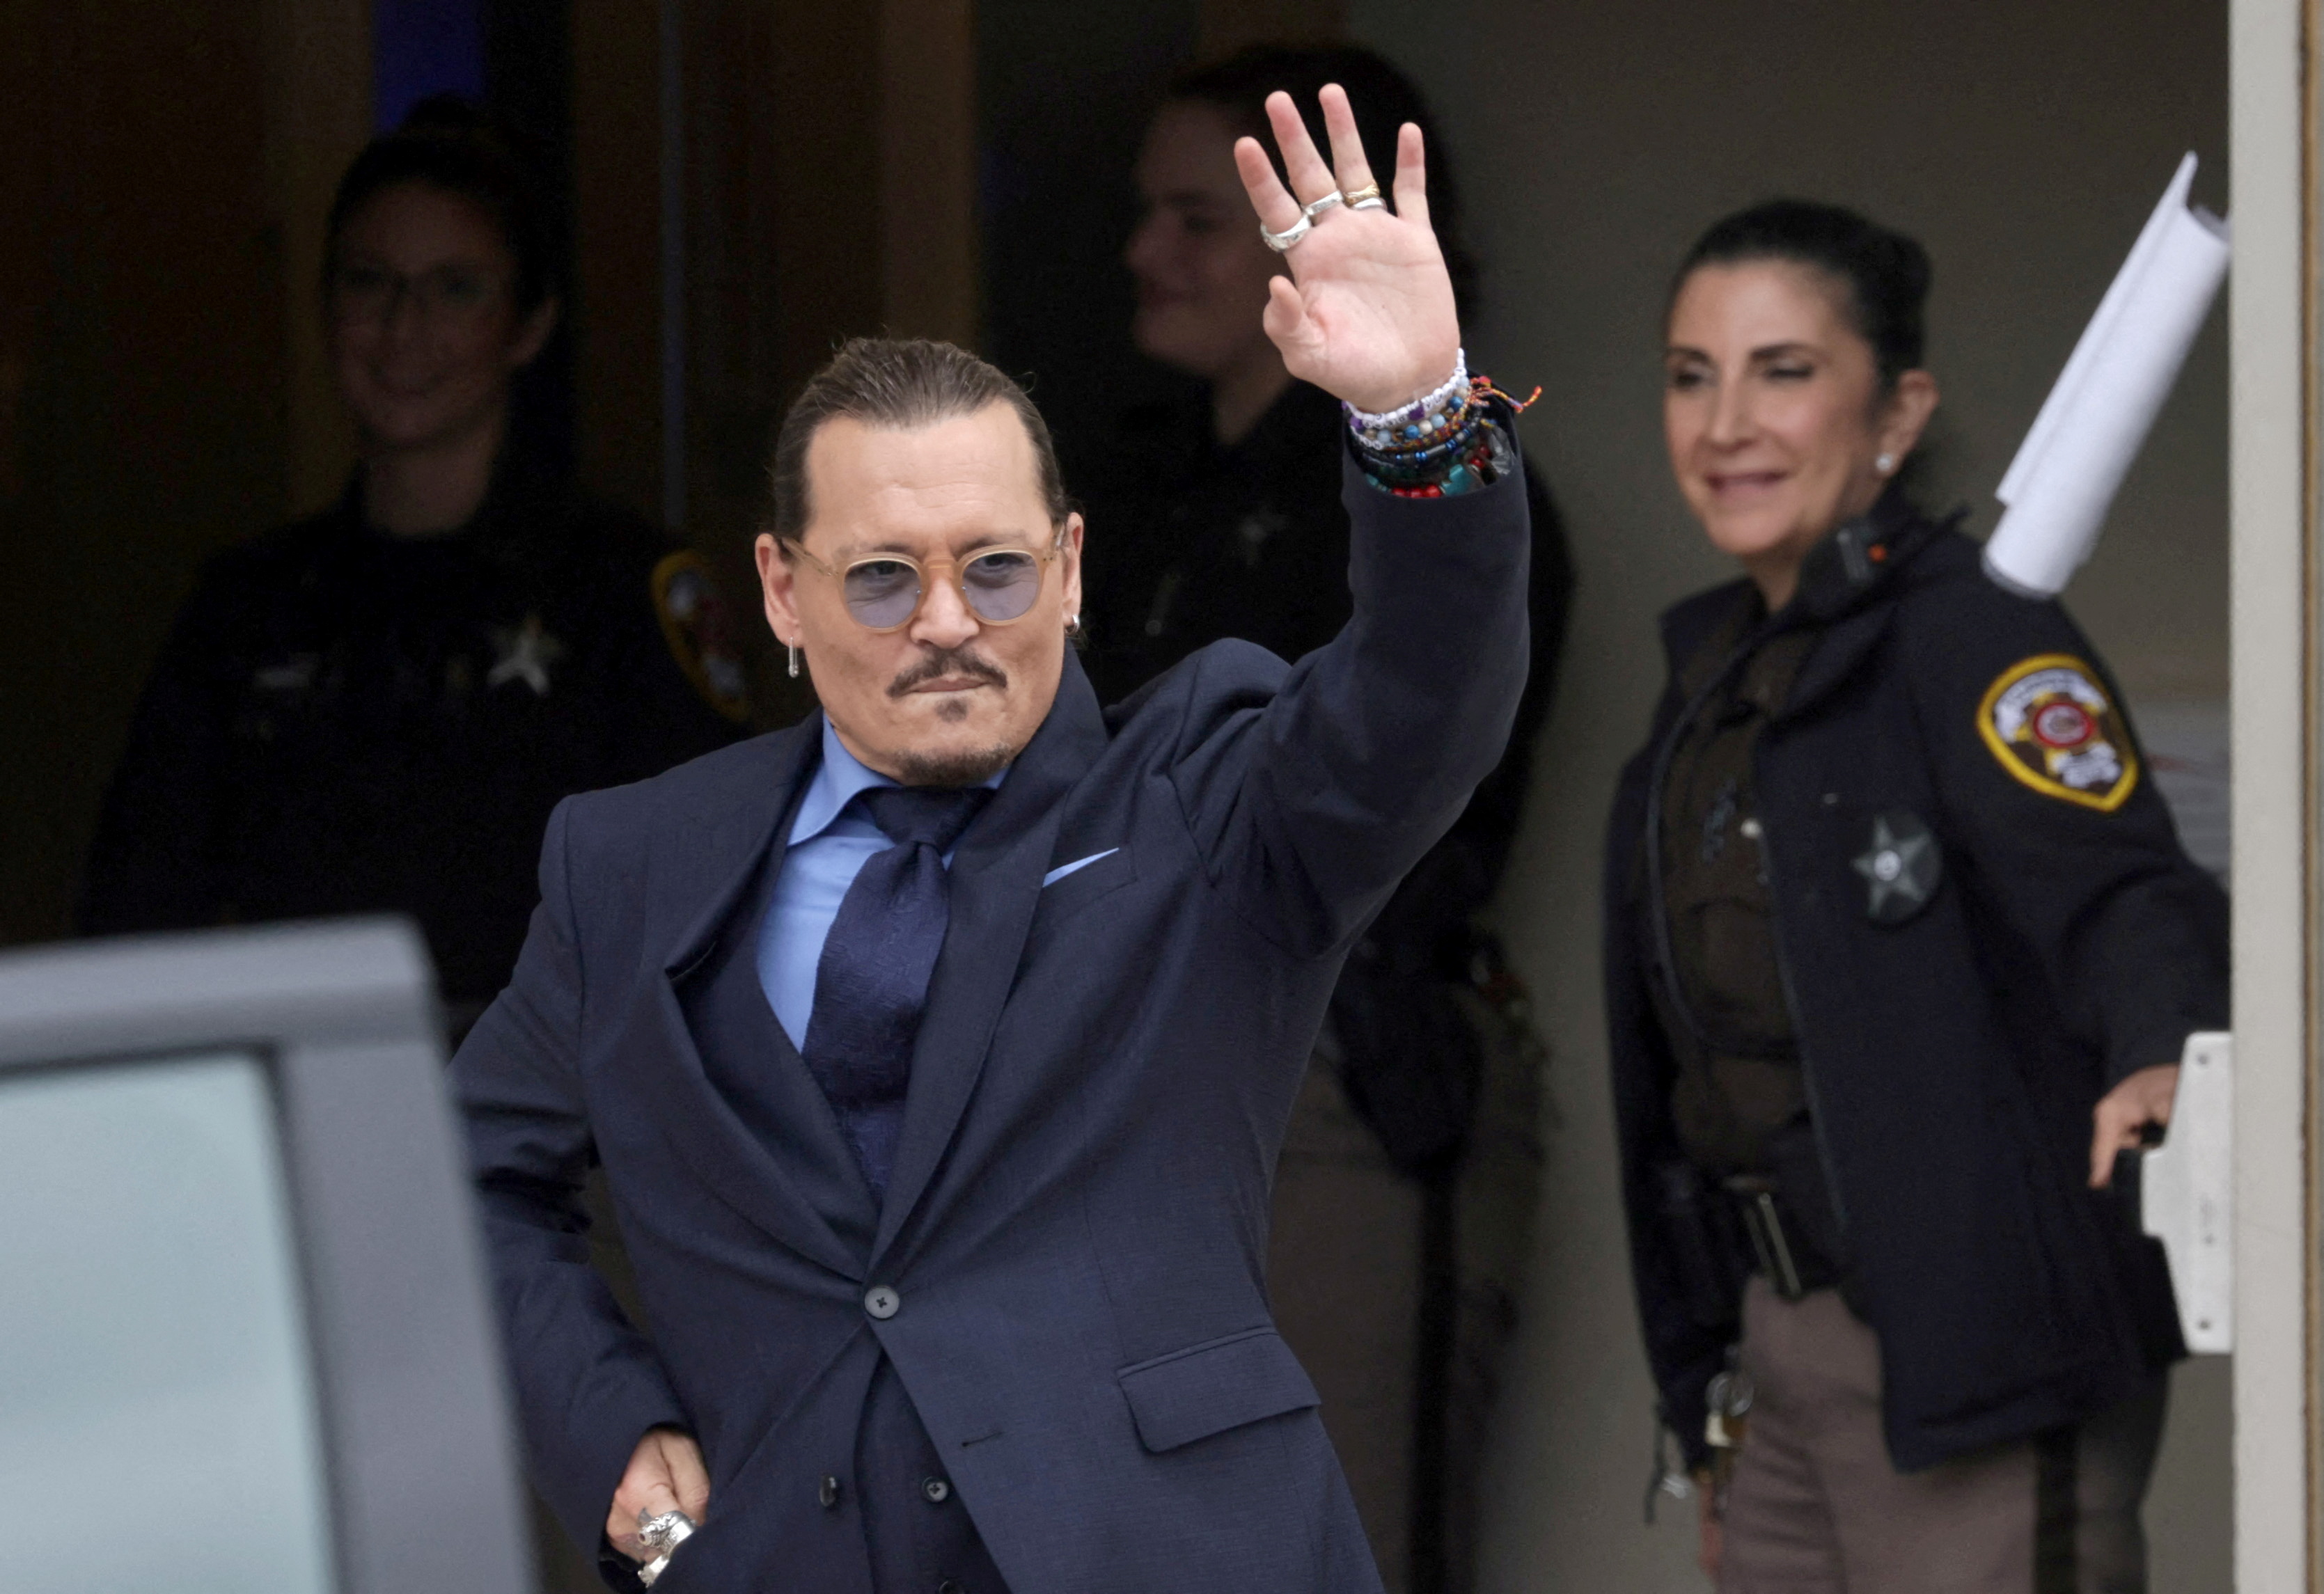 File photo: johnny depp greets his fans as he leaves the court after the defamation trial against his ex-wife amber heard on may 27, 2022 (reuters/evelyn hawkstein)